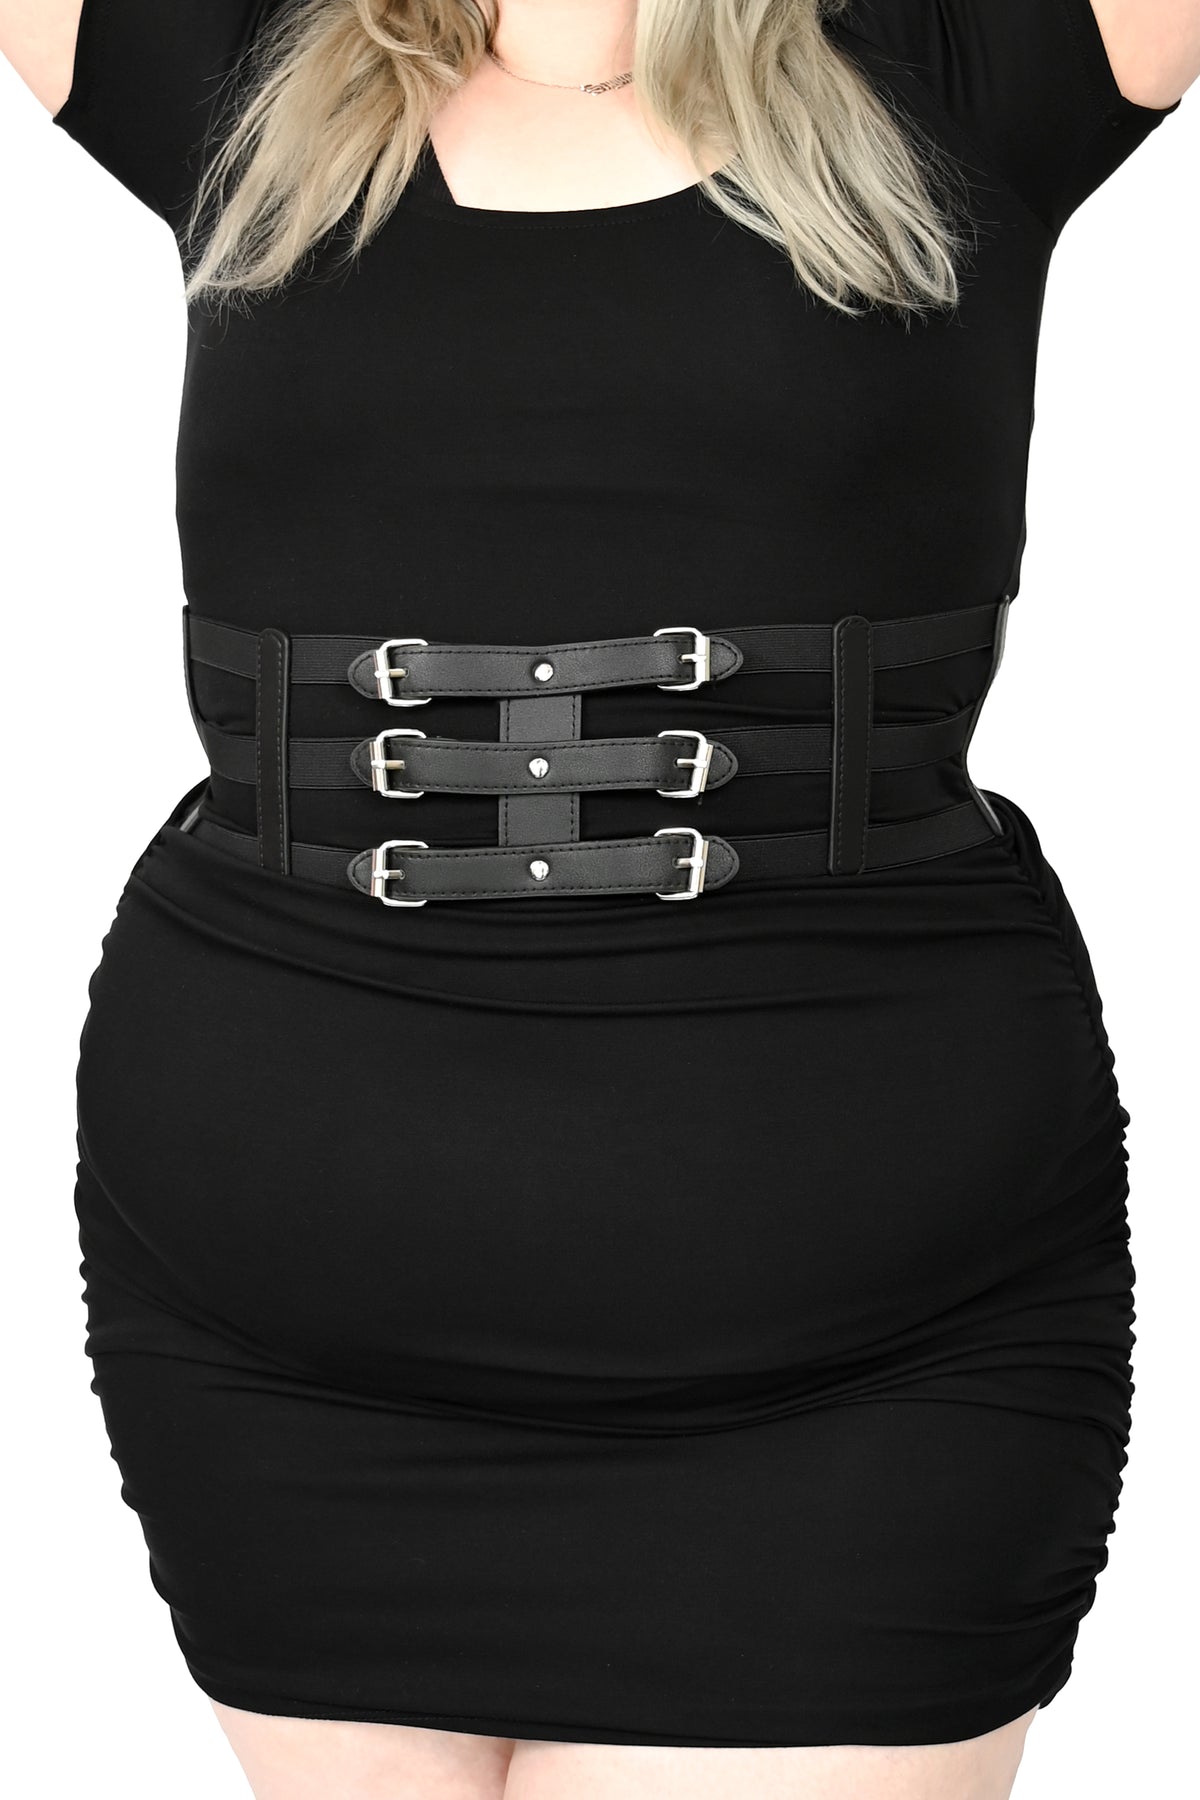 black faux leather belt with 3 buckle straps